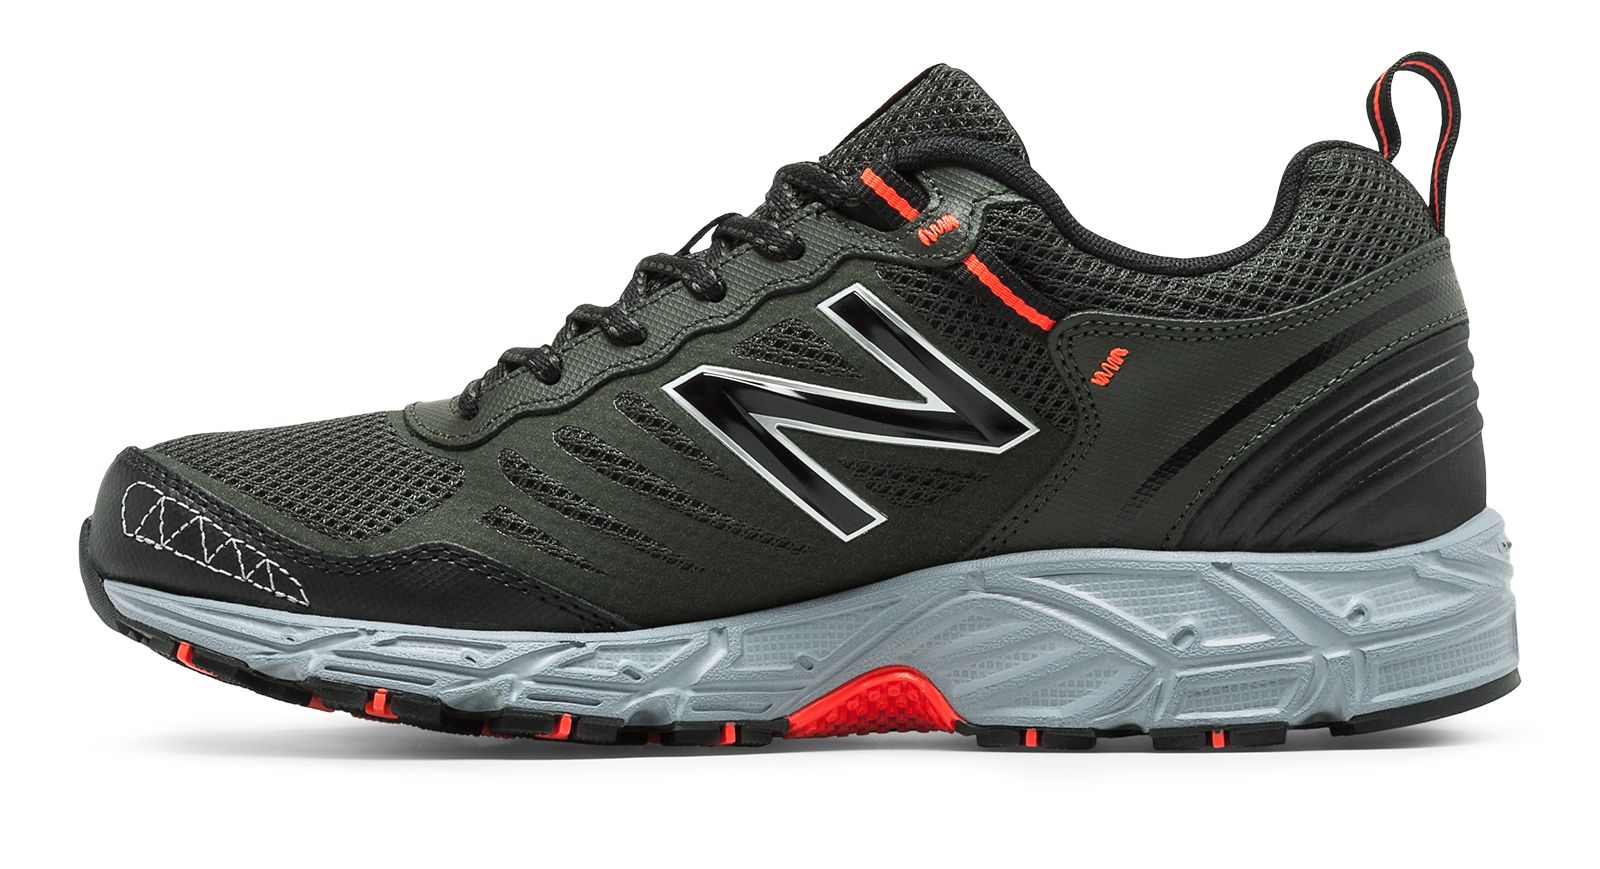 new balance 573 for sale